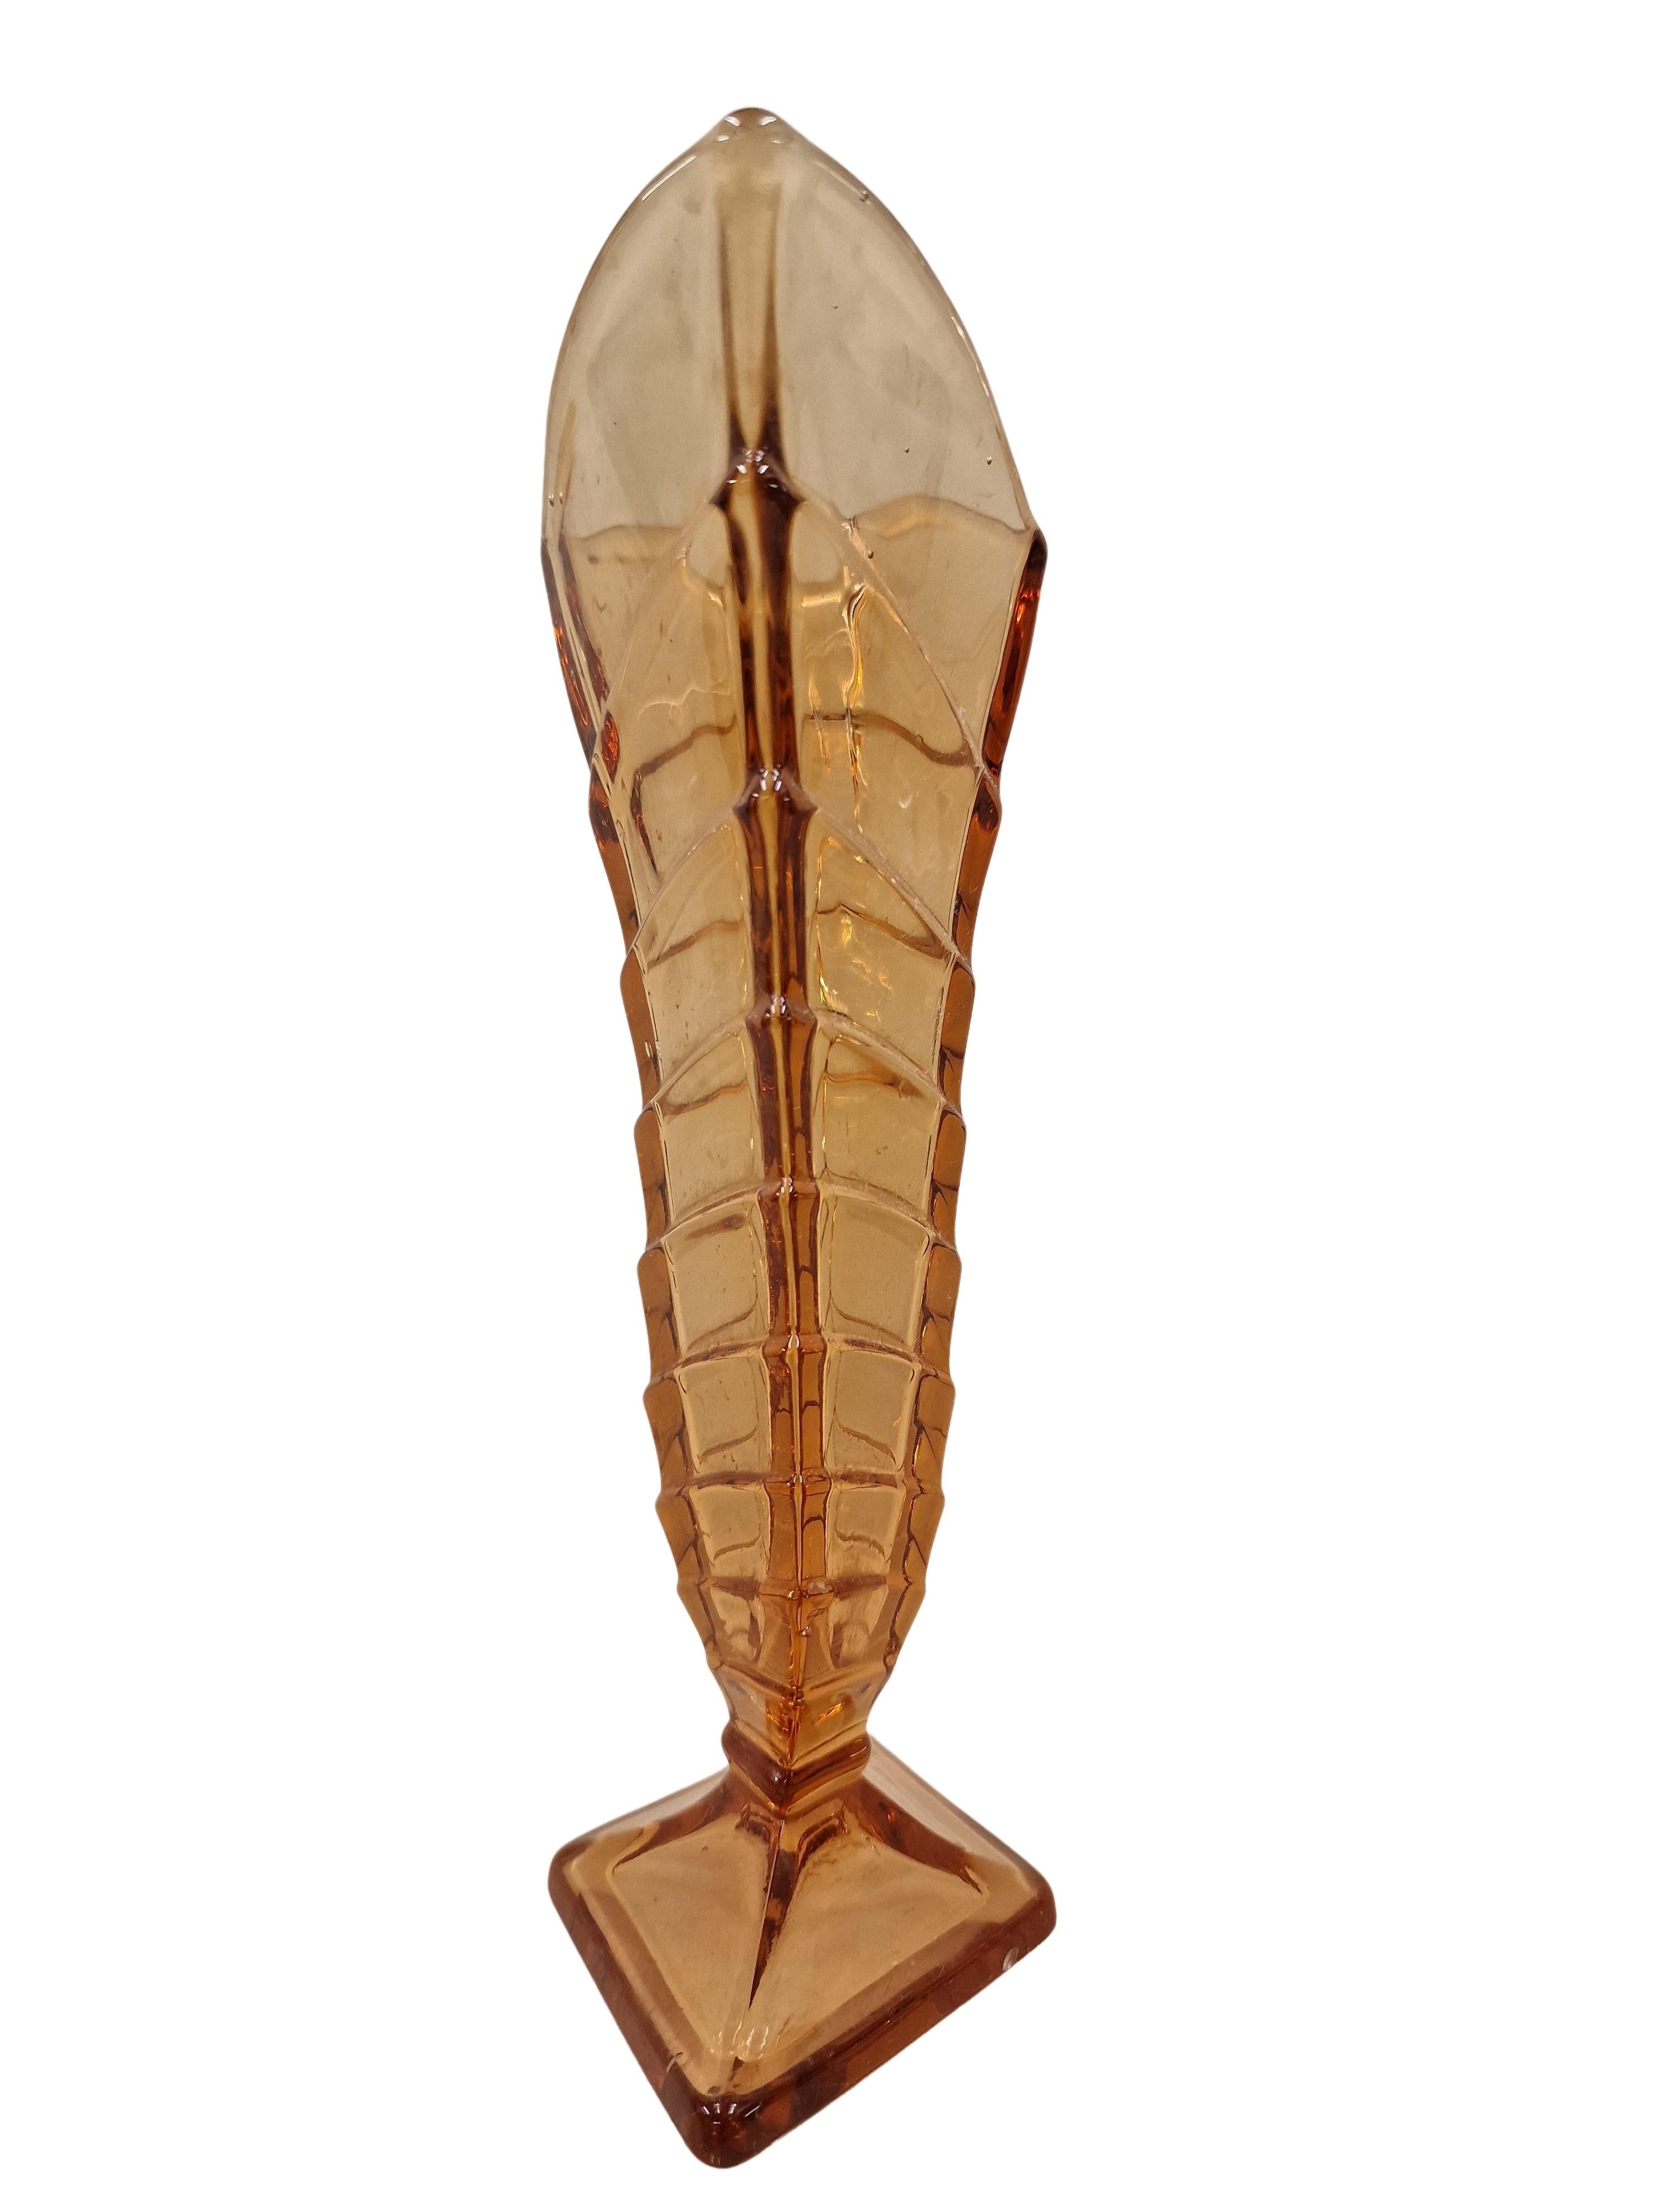 An extremely decorative flower vase, an original from the Art Deco period, most likely from the well-known German manufacturer Walther Glas.

The vase has a square base, which then extends upwards in a staircase-like structure and then ends again in